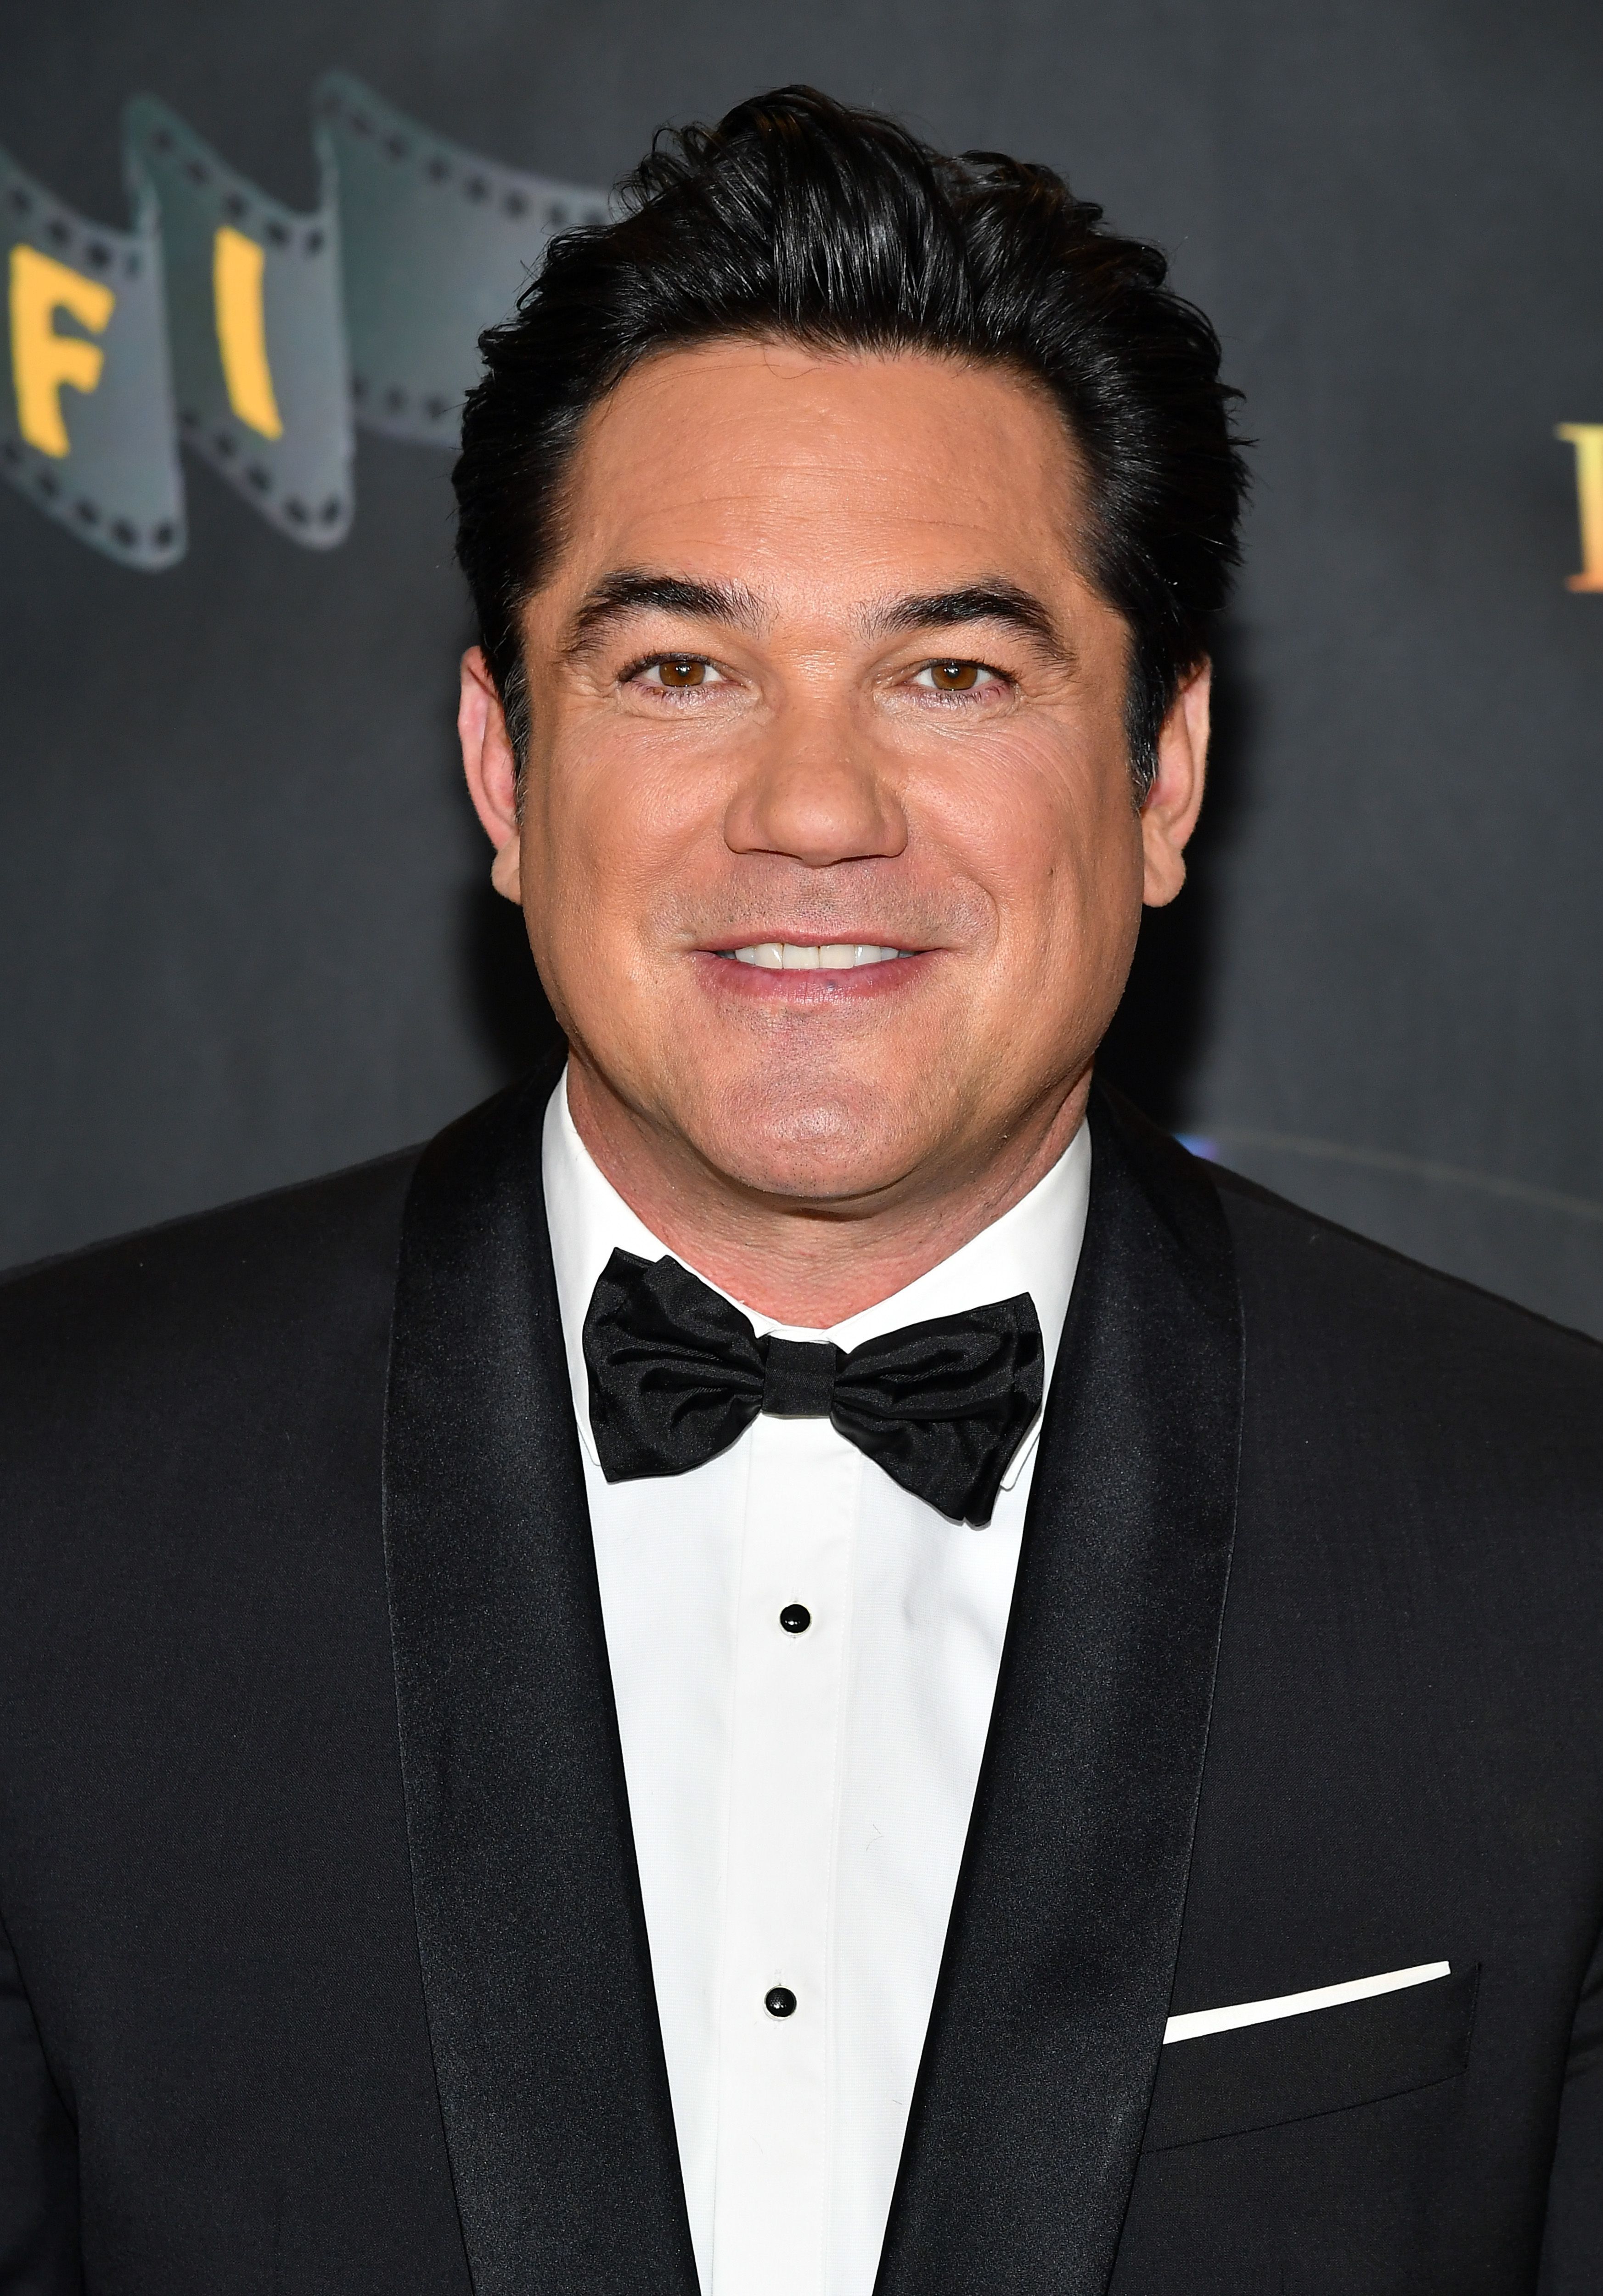 Dean Cain attends the 24th Family Film Awards at Hilton Los Angeles/Universal City on March 24, 2021, in Universal City, California. | Source: Getty Images